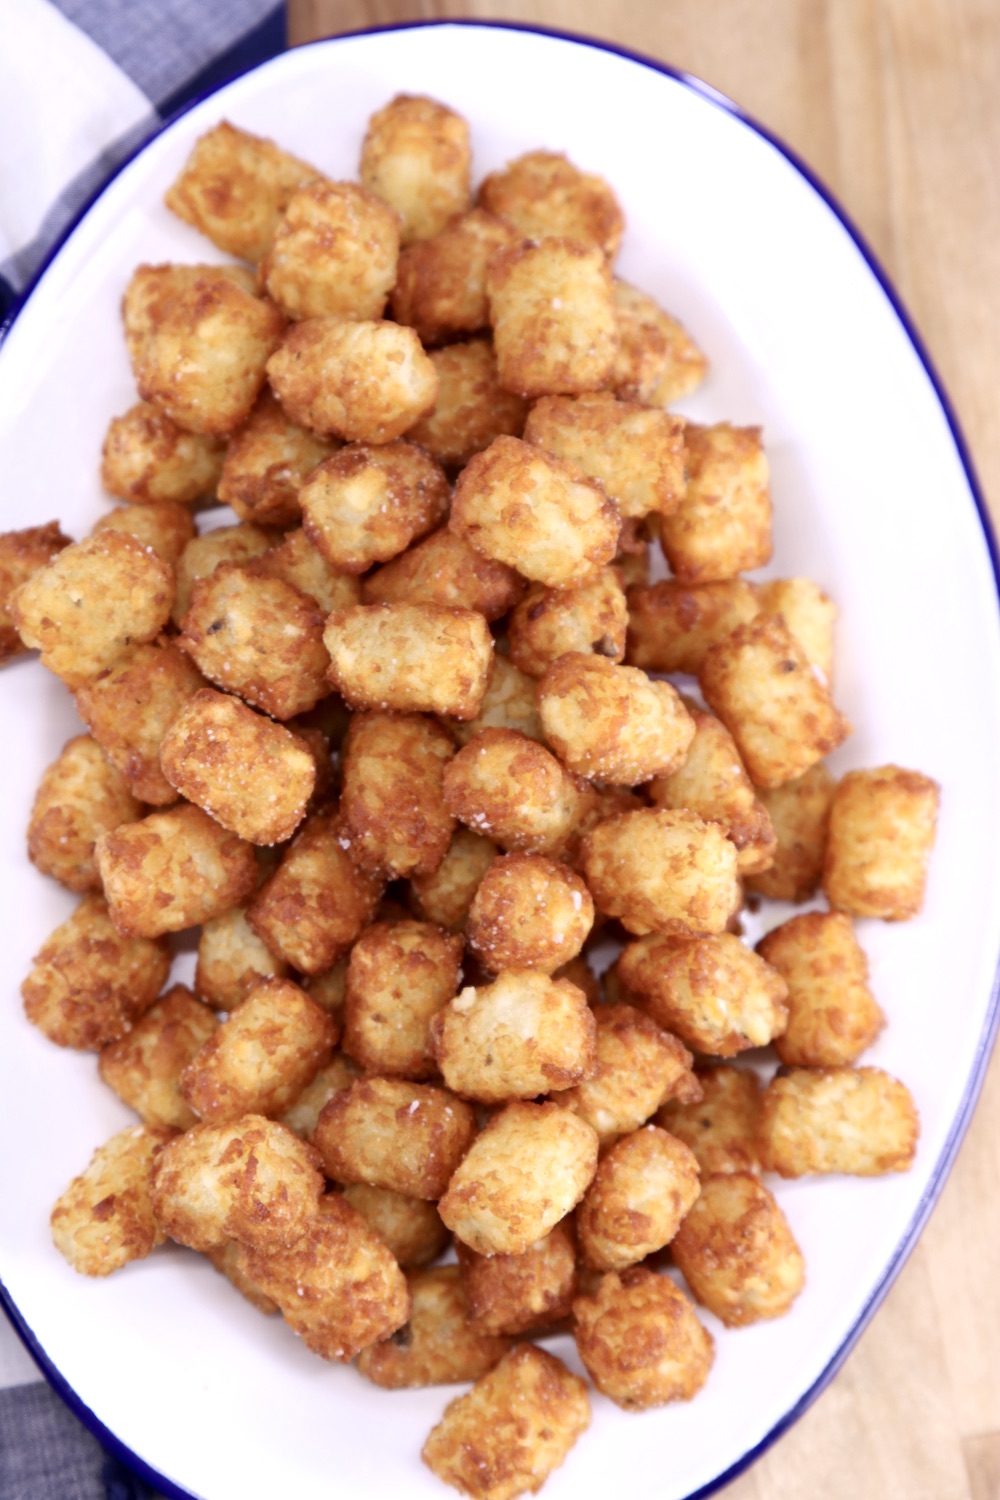 Tater tots on an oval platter